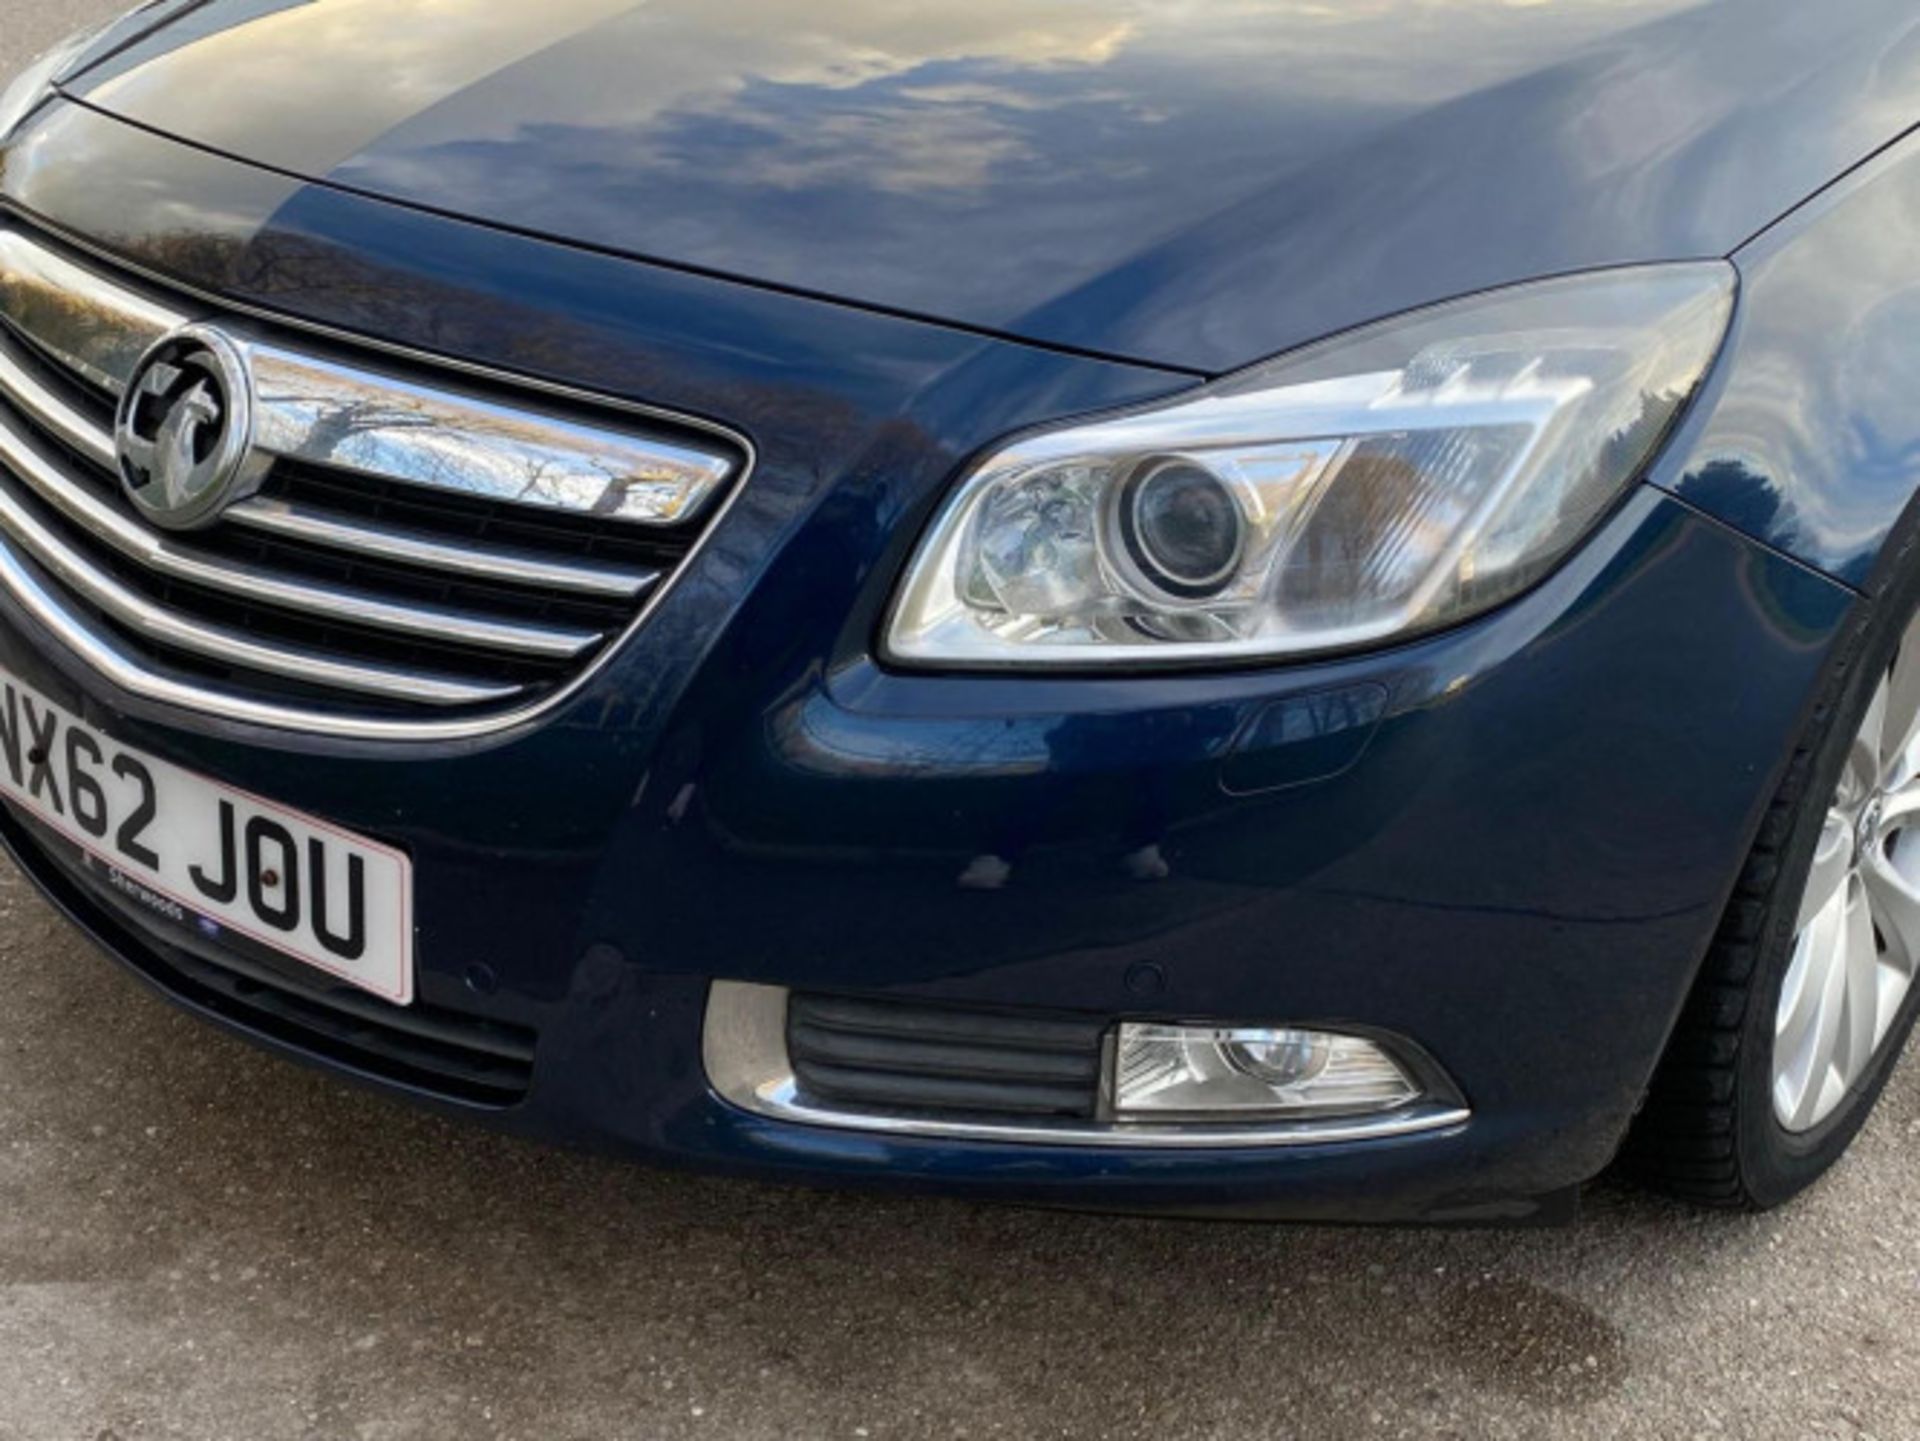 2012 VAUXHALL INSIGNIA 2.0 CDTI ELITE AUTO EURO 5 - DISCOVER EXCELLENCE >>--NO VAT ON HAMMER--<< - Image 103 of 120